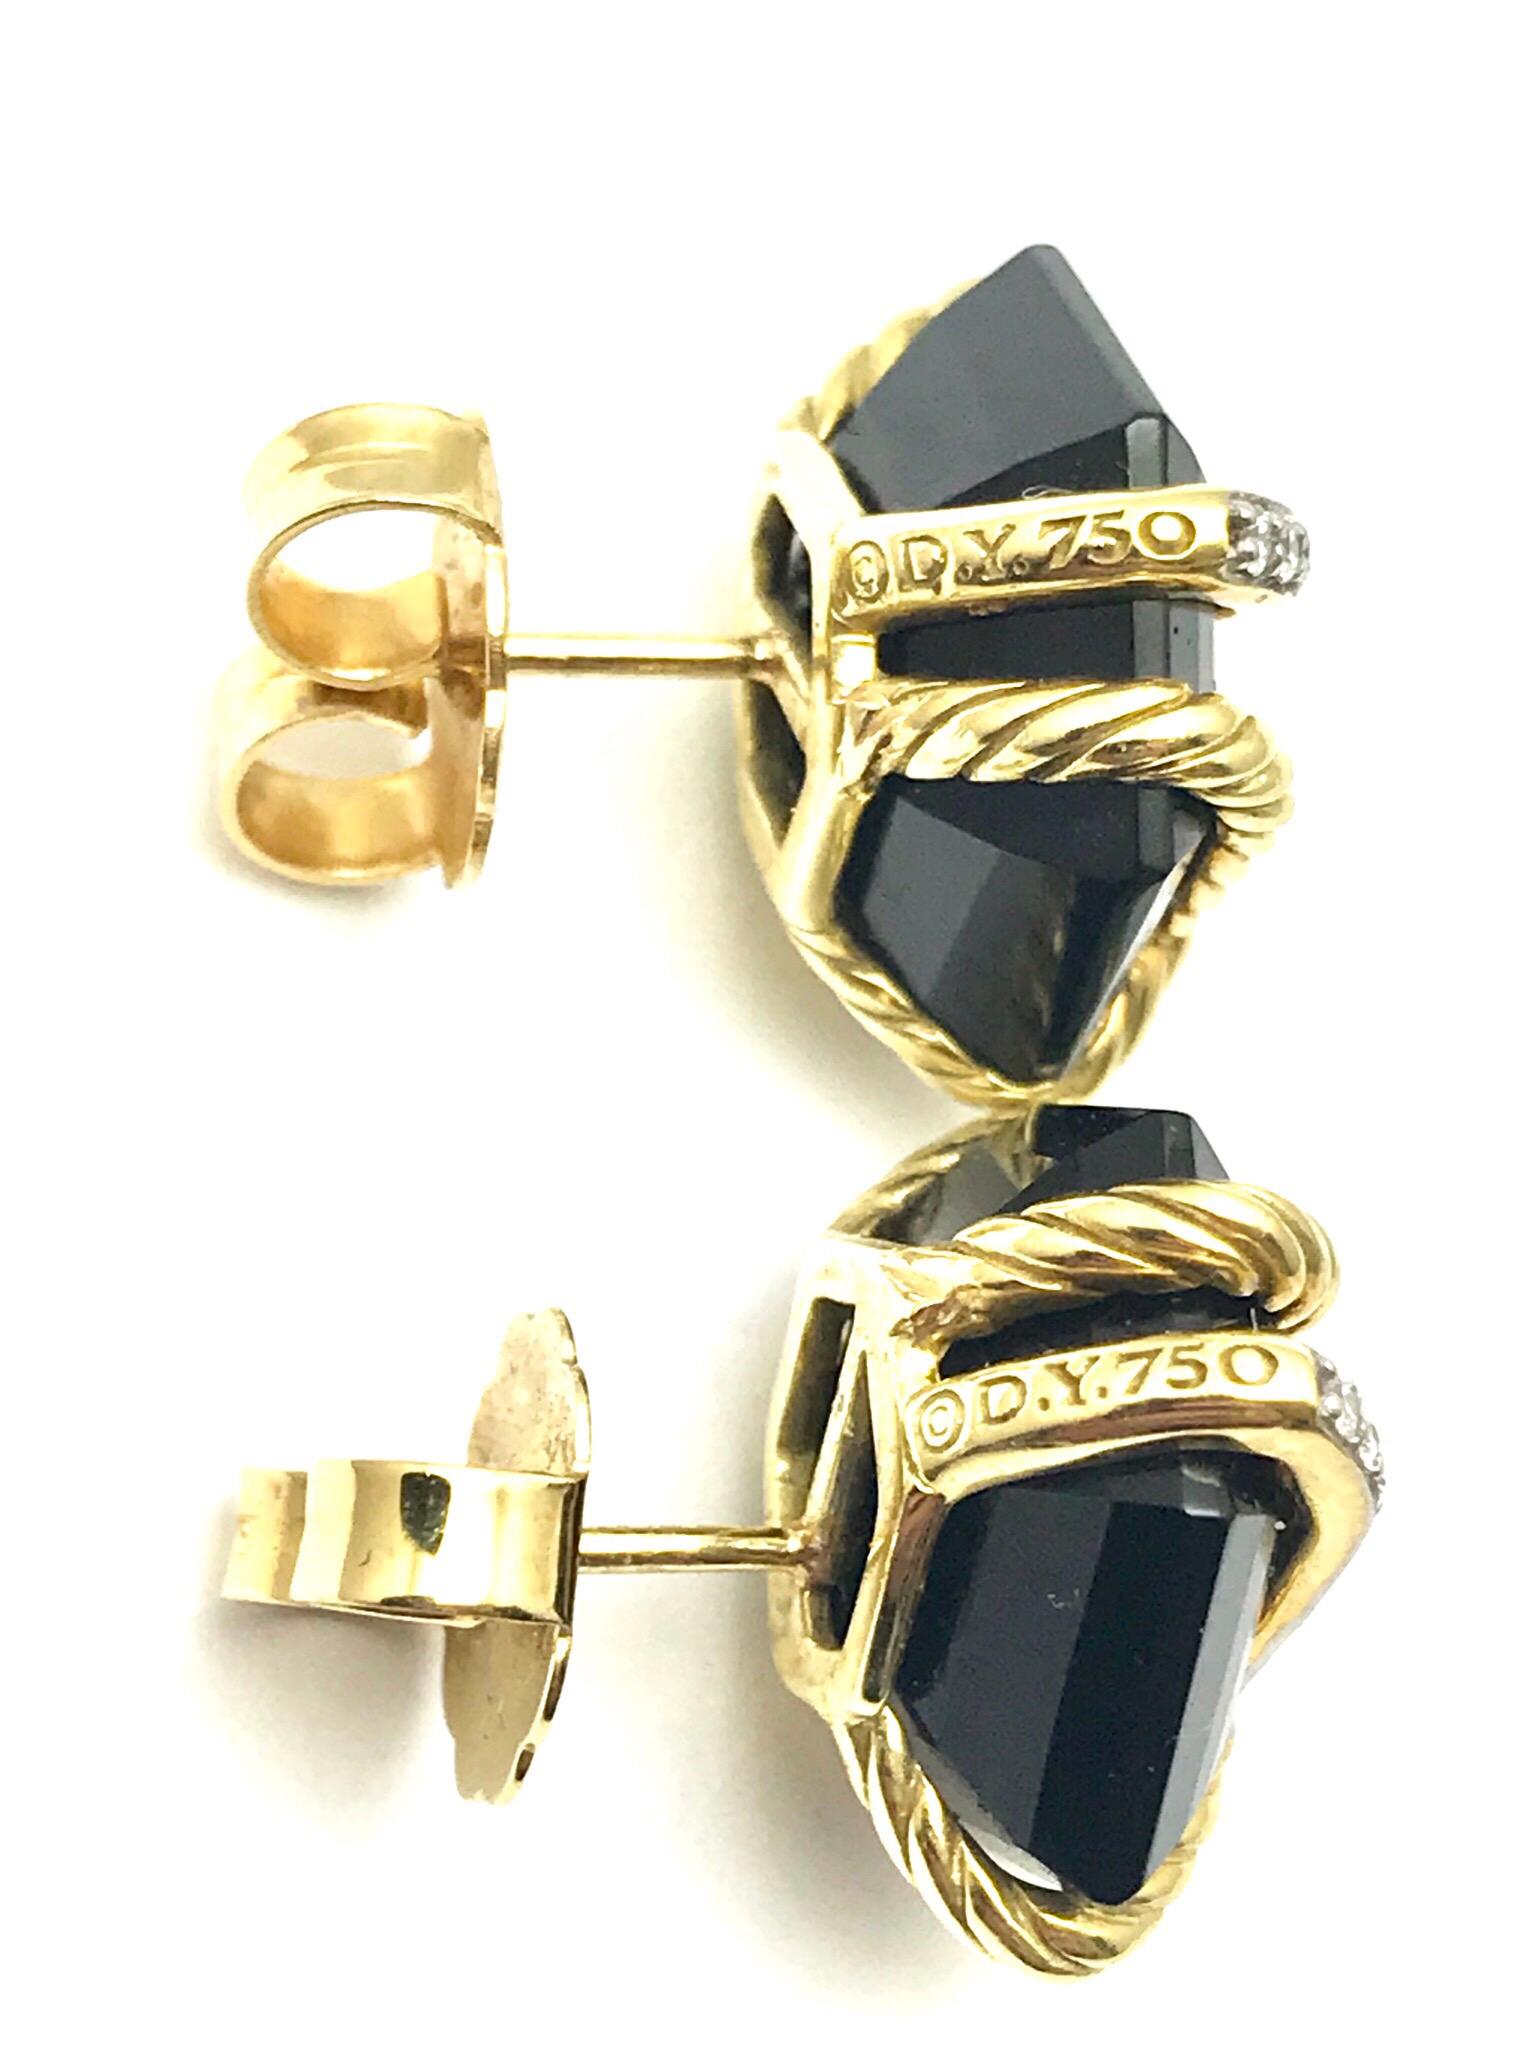 David Yurman cable wrap earrings with black onyx and diamonds in 18 karat yellow gold.  There is 0.06 carats in diamonds, and the onyx is 10.00 x 10.00mm.  The Cable Wrap Collection highlights David Yurman’s strength as an innovator, creating